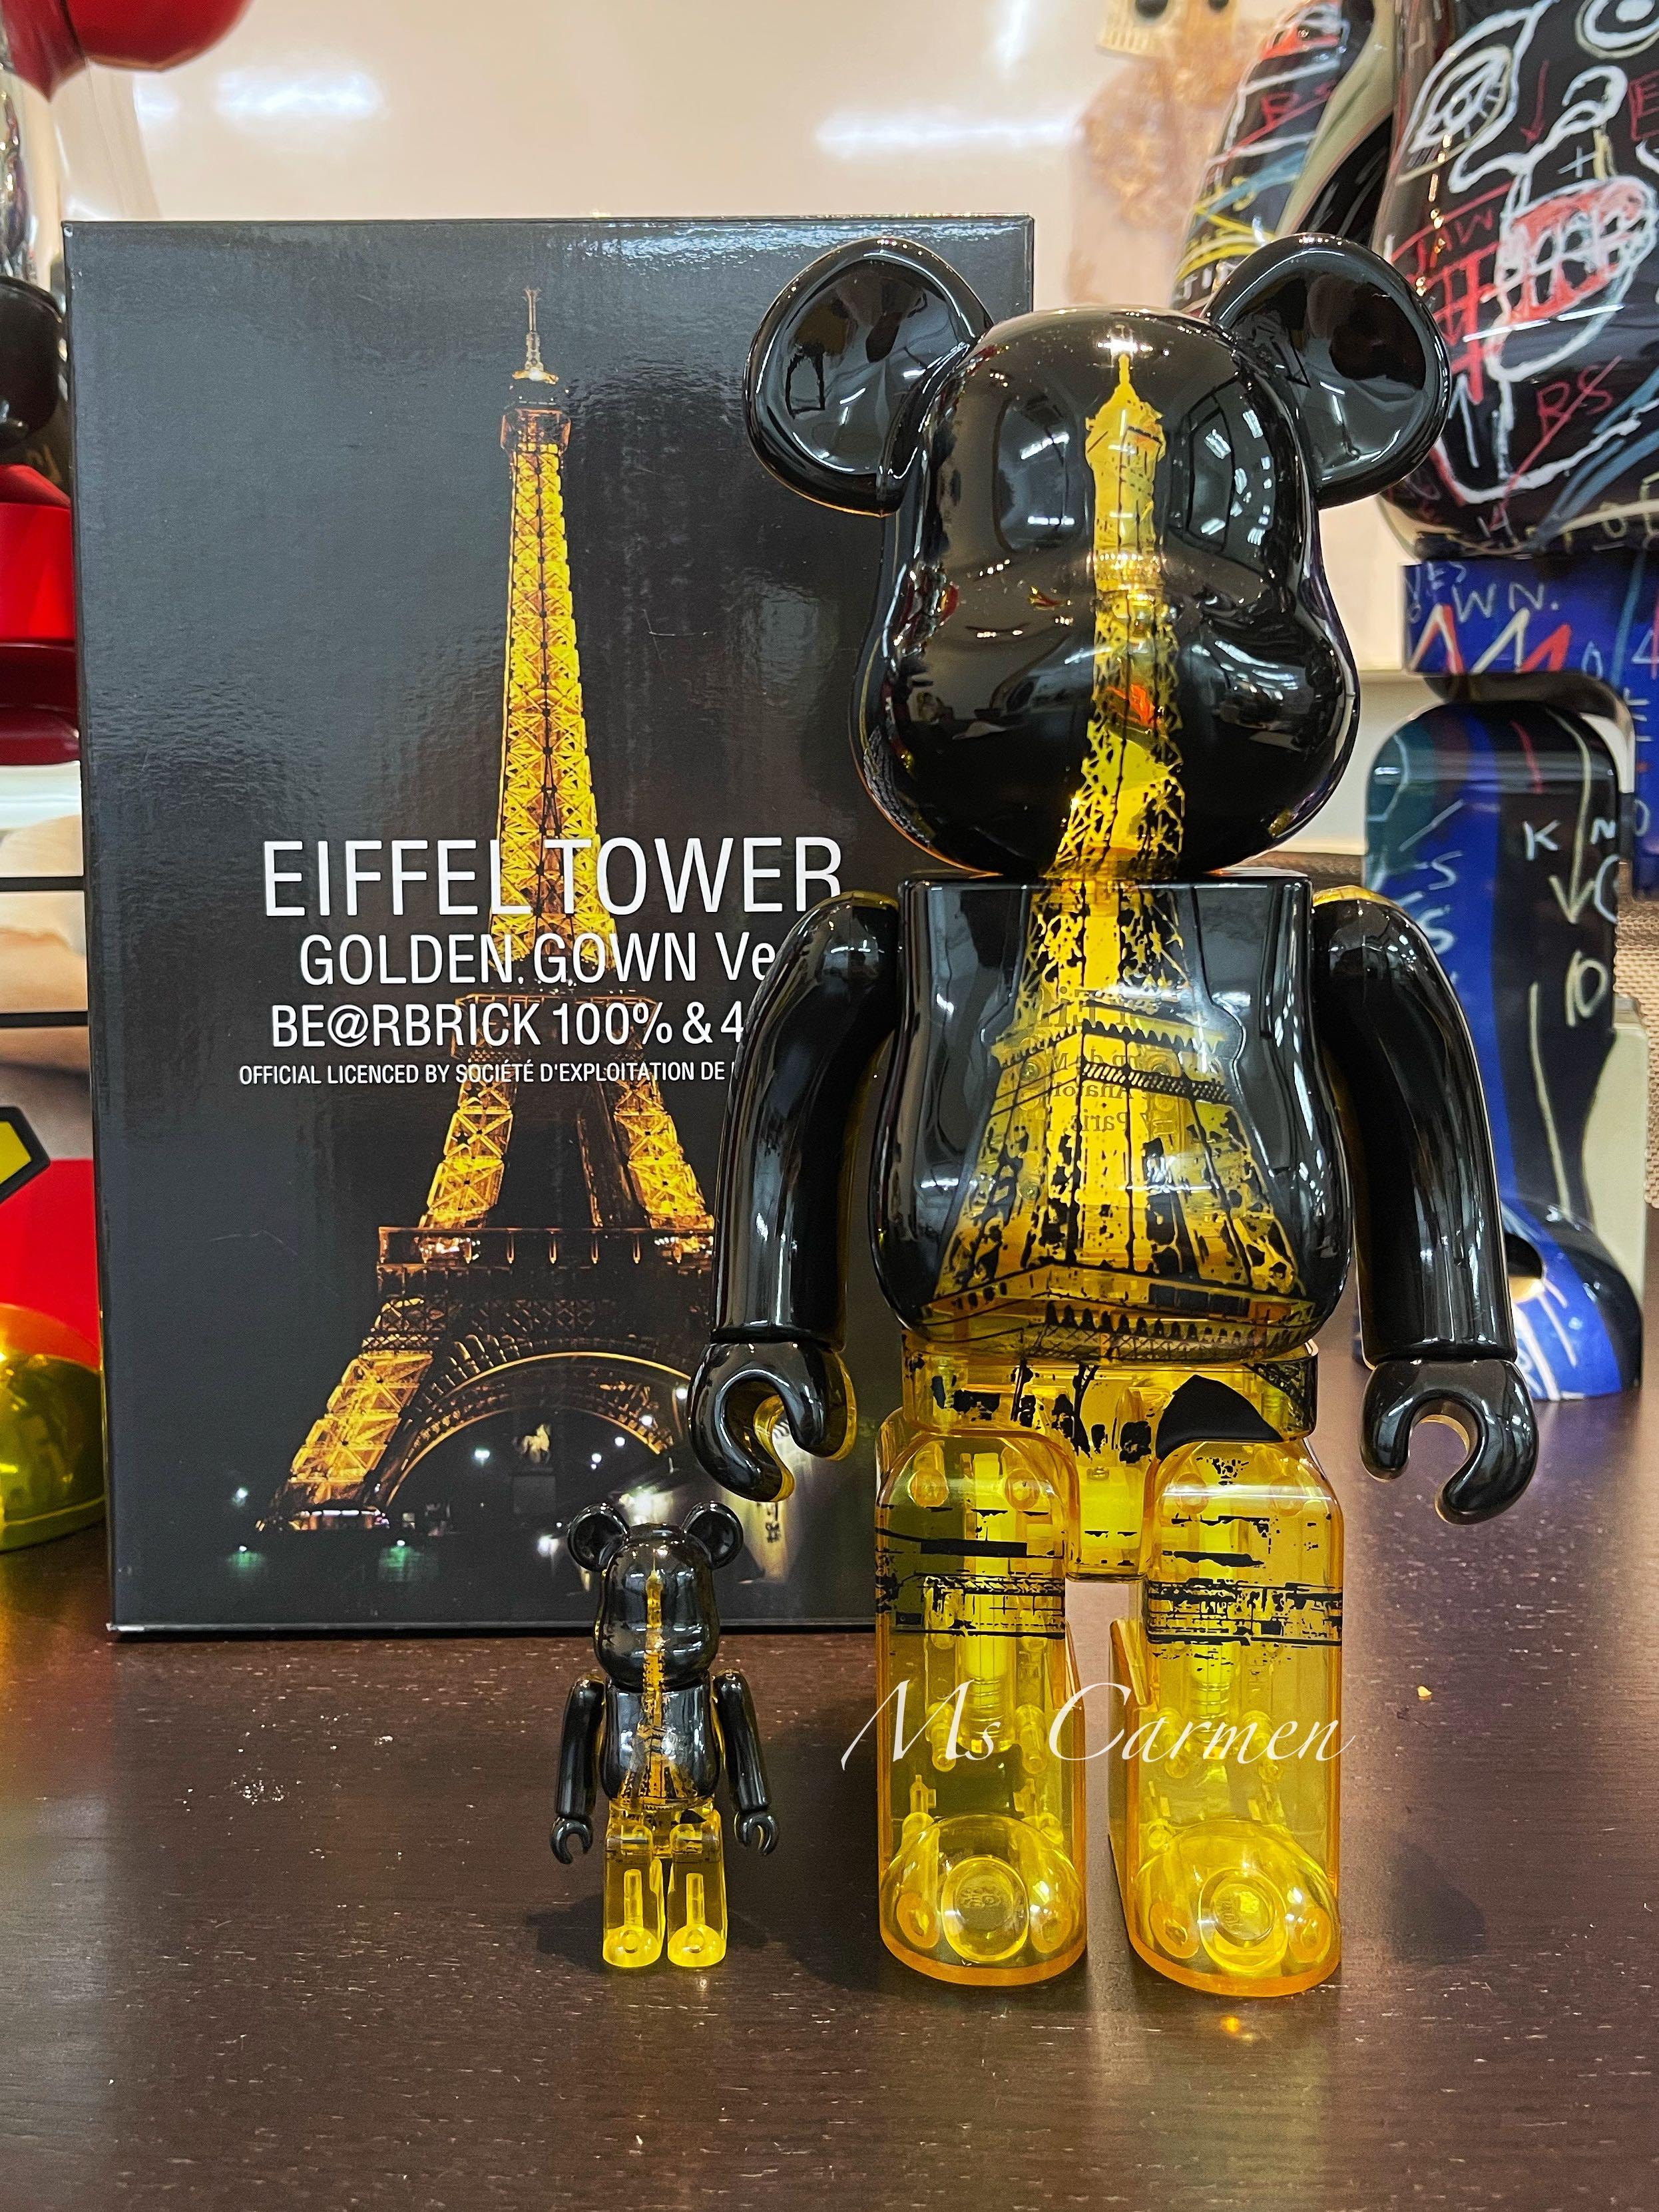 BE@RBRICK EIFFEL TOWER GOLDEN GOWN